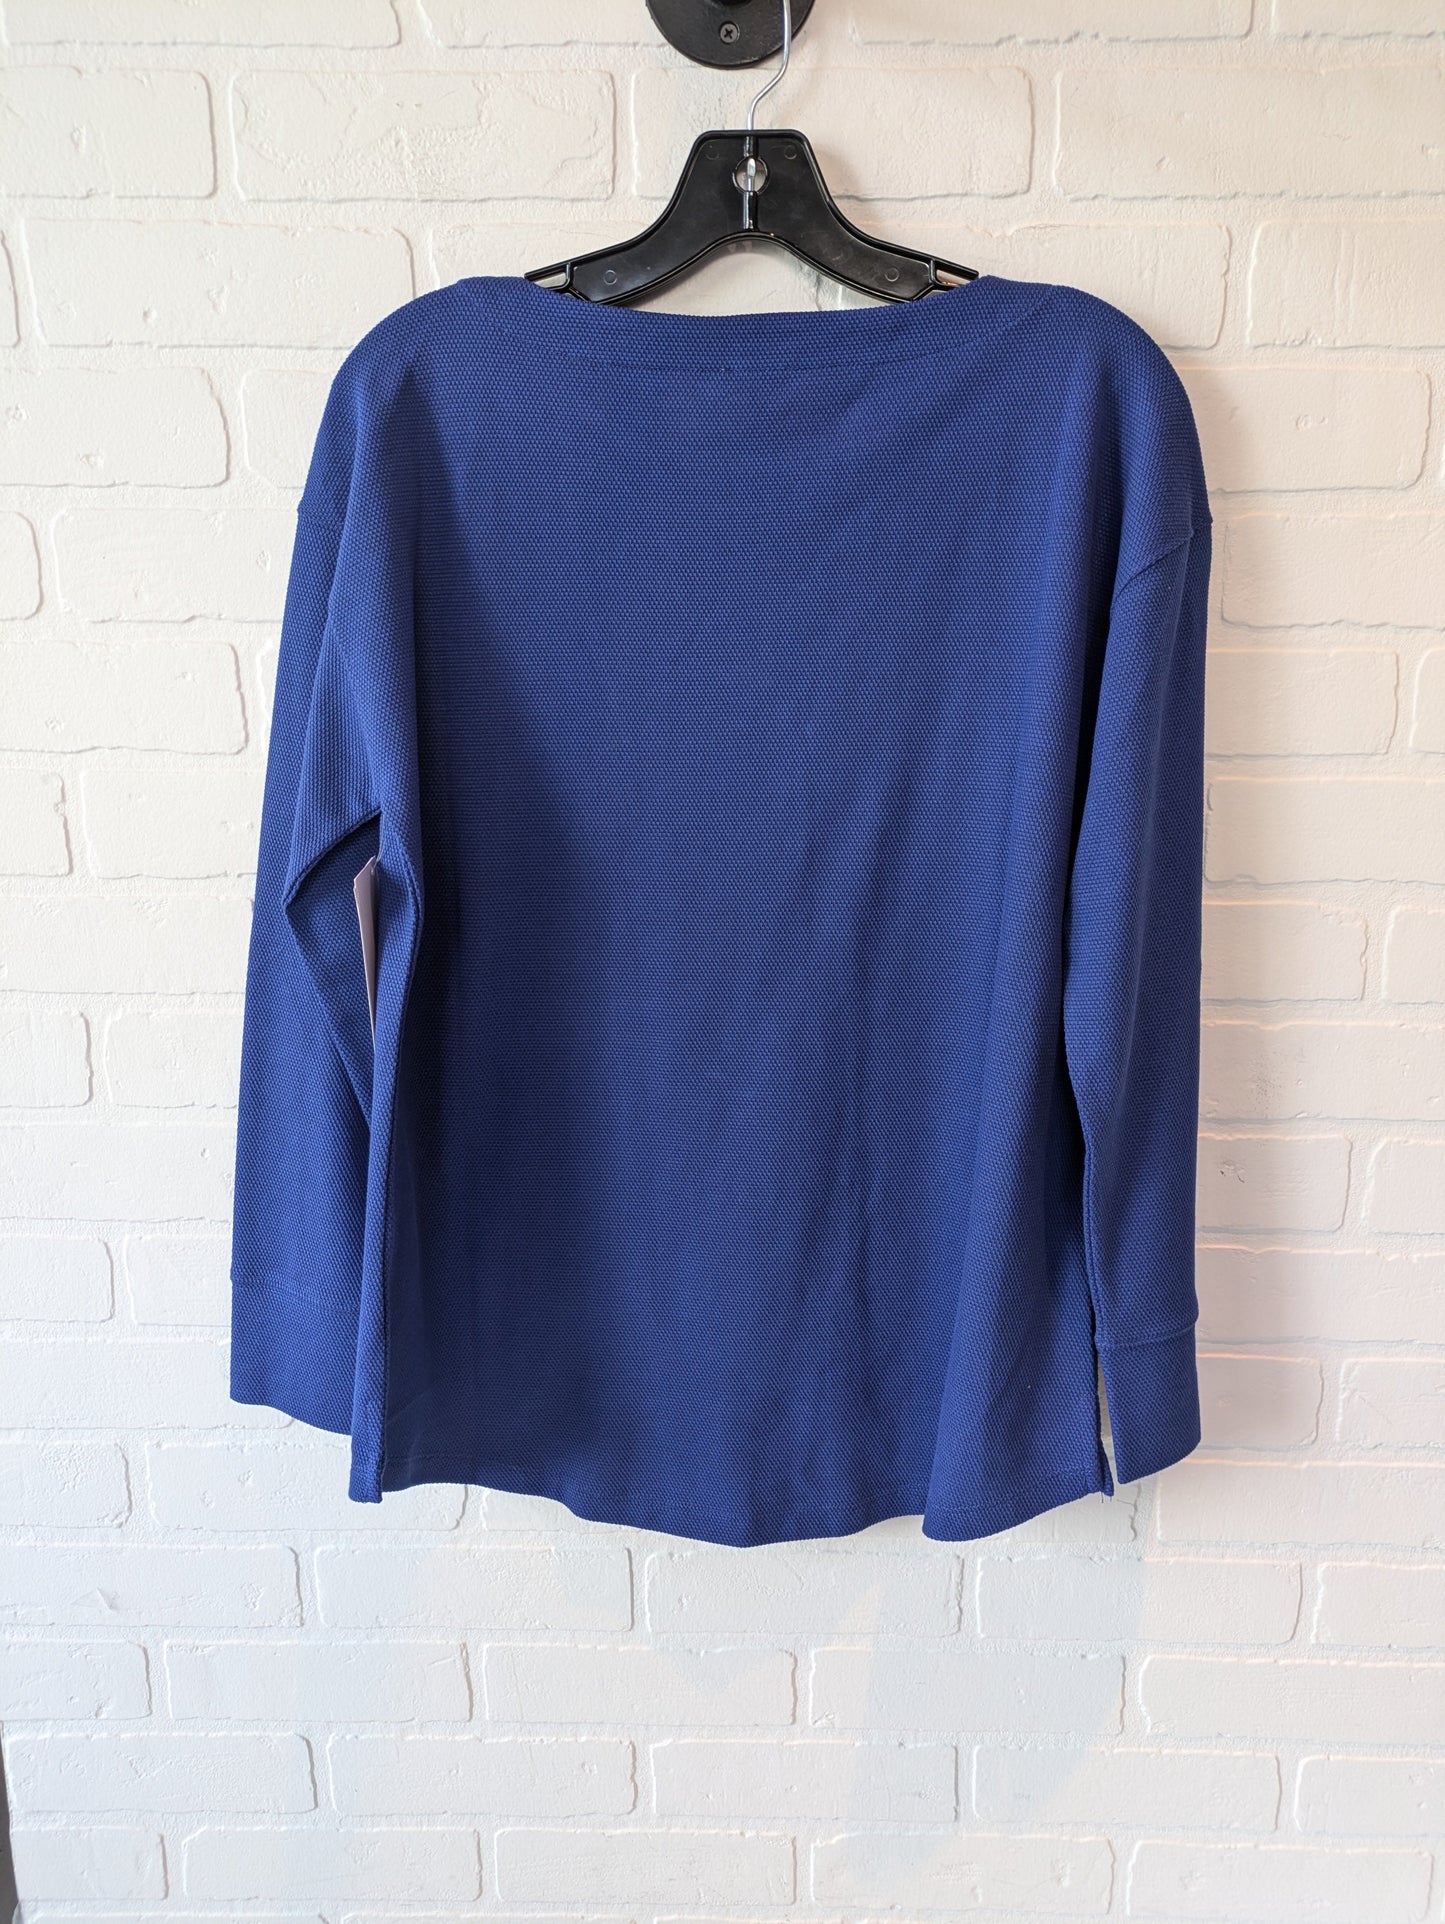 Blue & White Top Long Sleeve Talbots, Size M